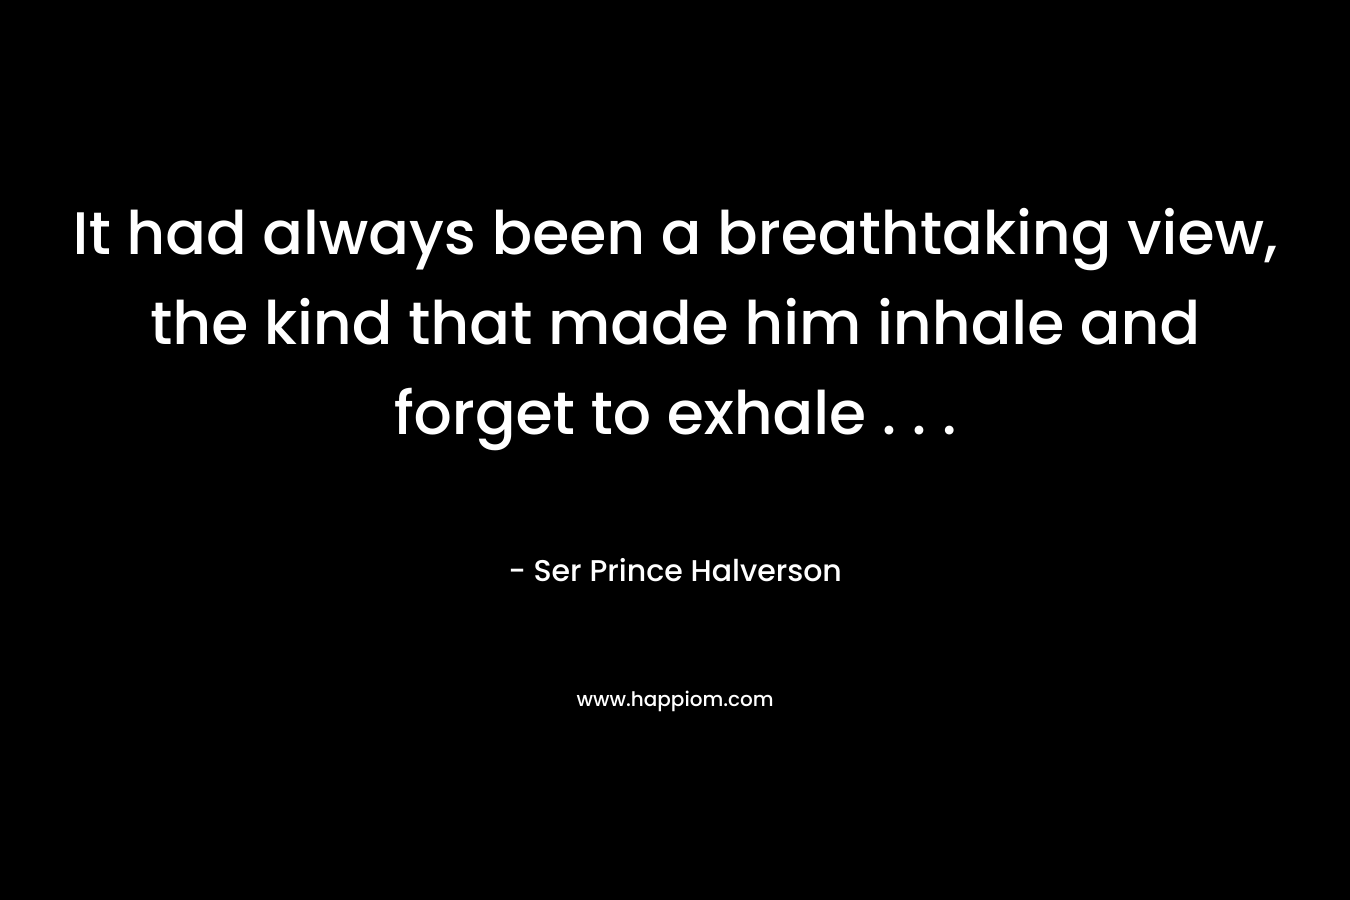 It had always been a breathtaking view, the kind that made him inhale and forget to exhale . . . – Ser Prince Halverson